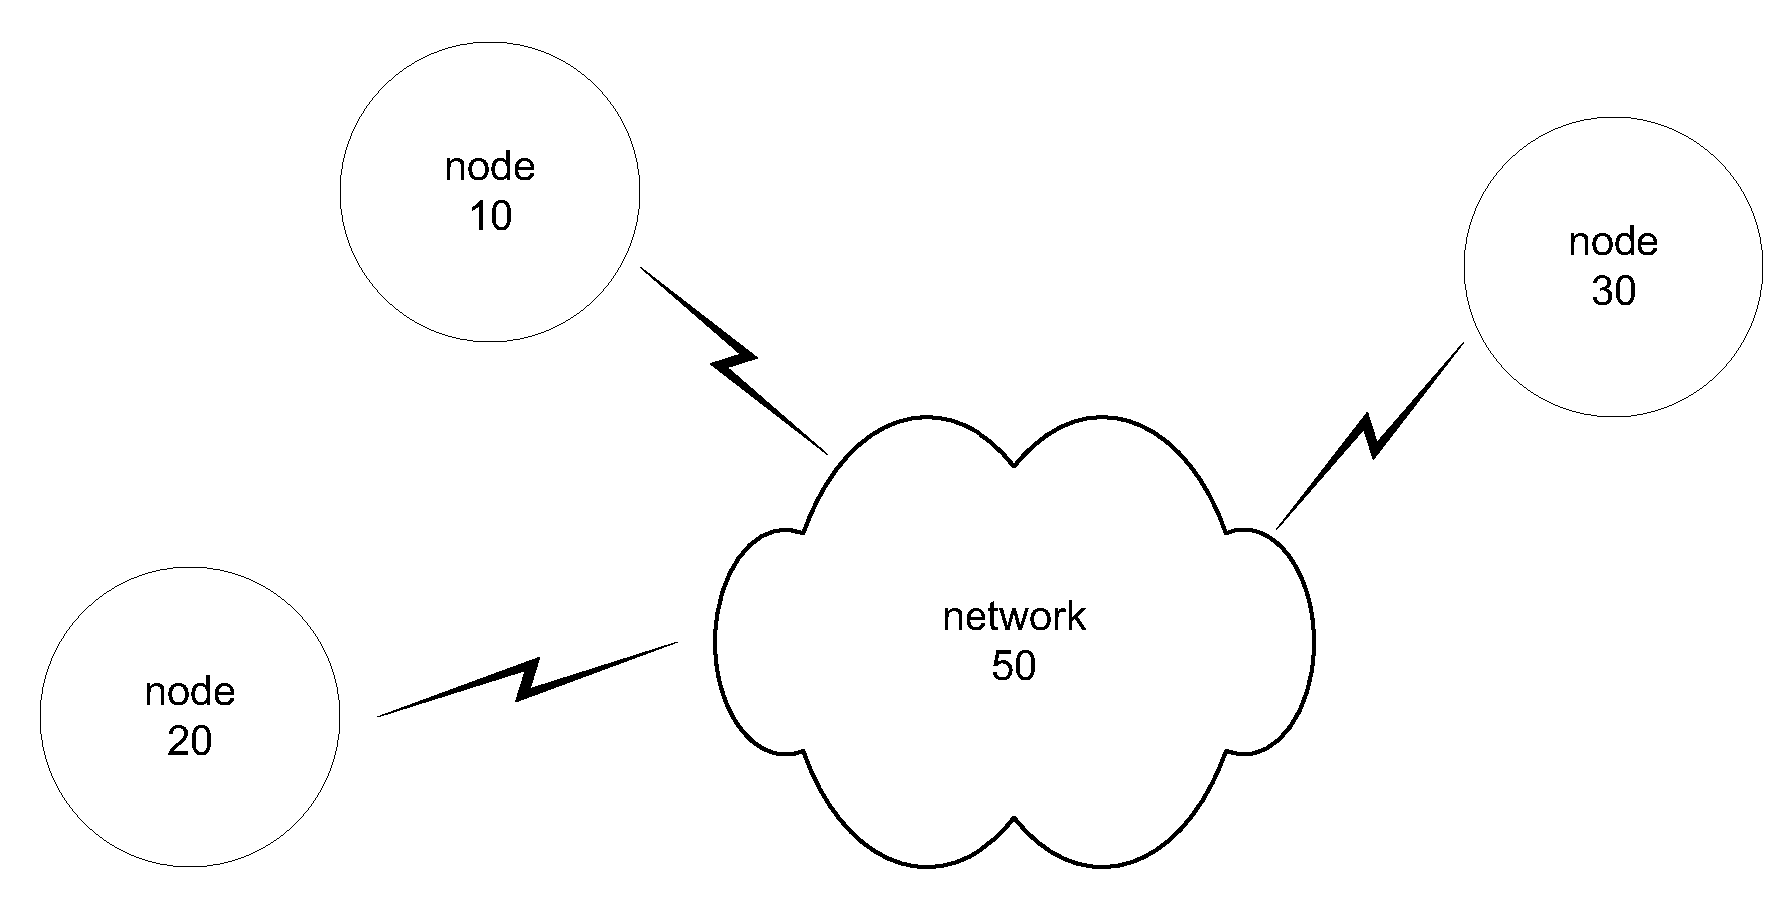 System and Method for Identifying Nodes in a Wireless Network